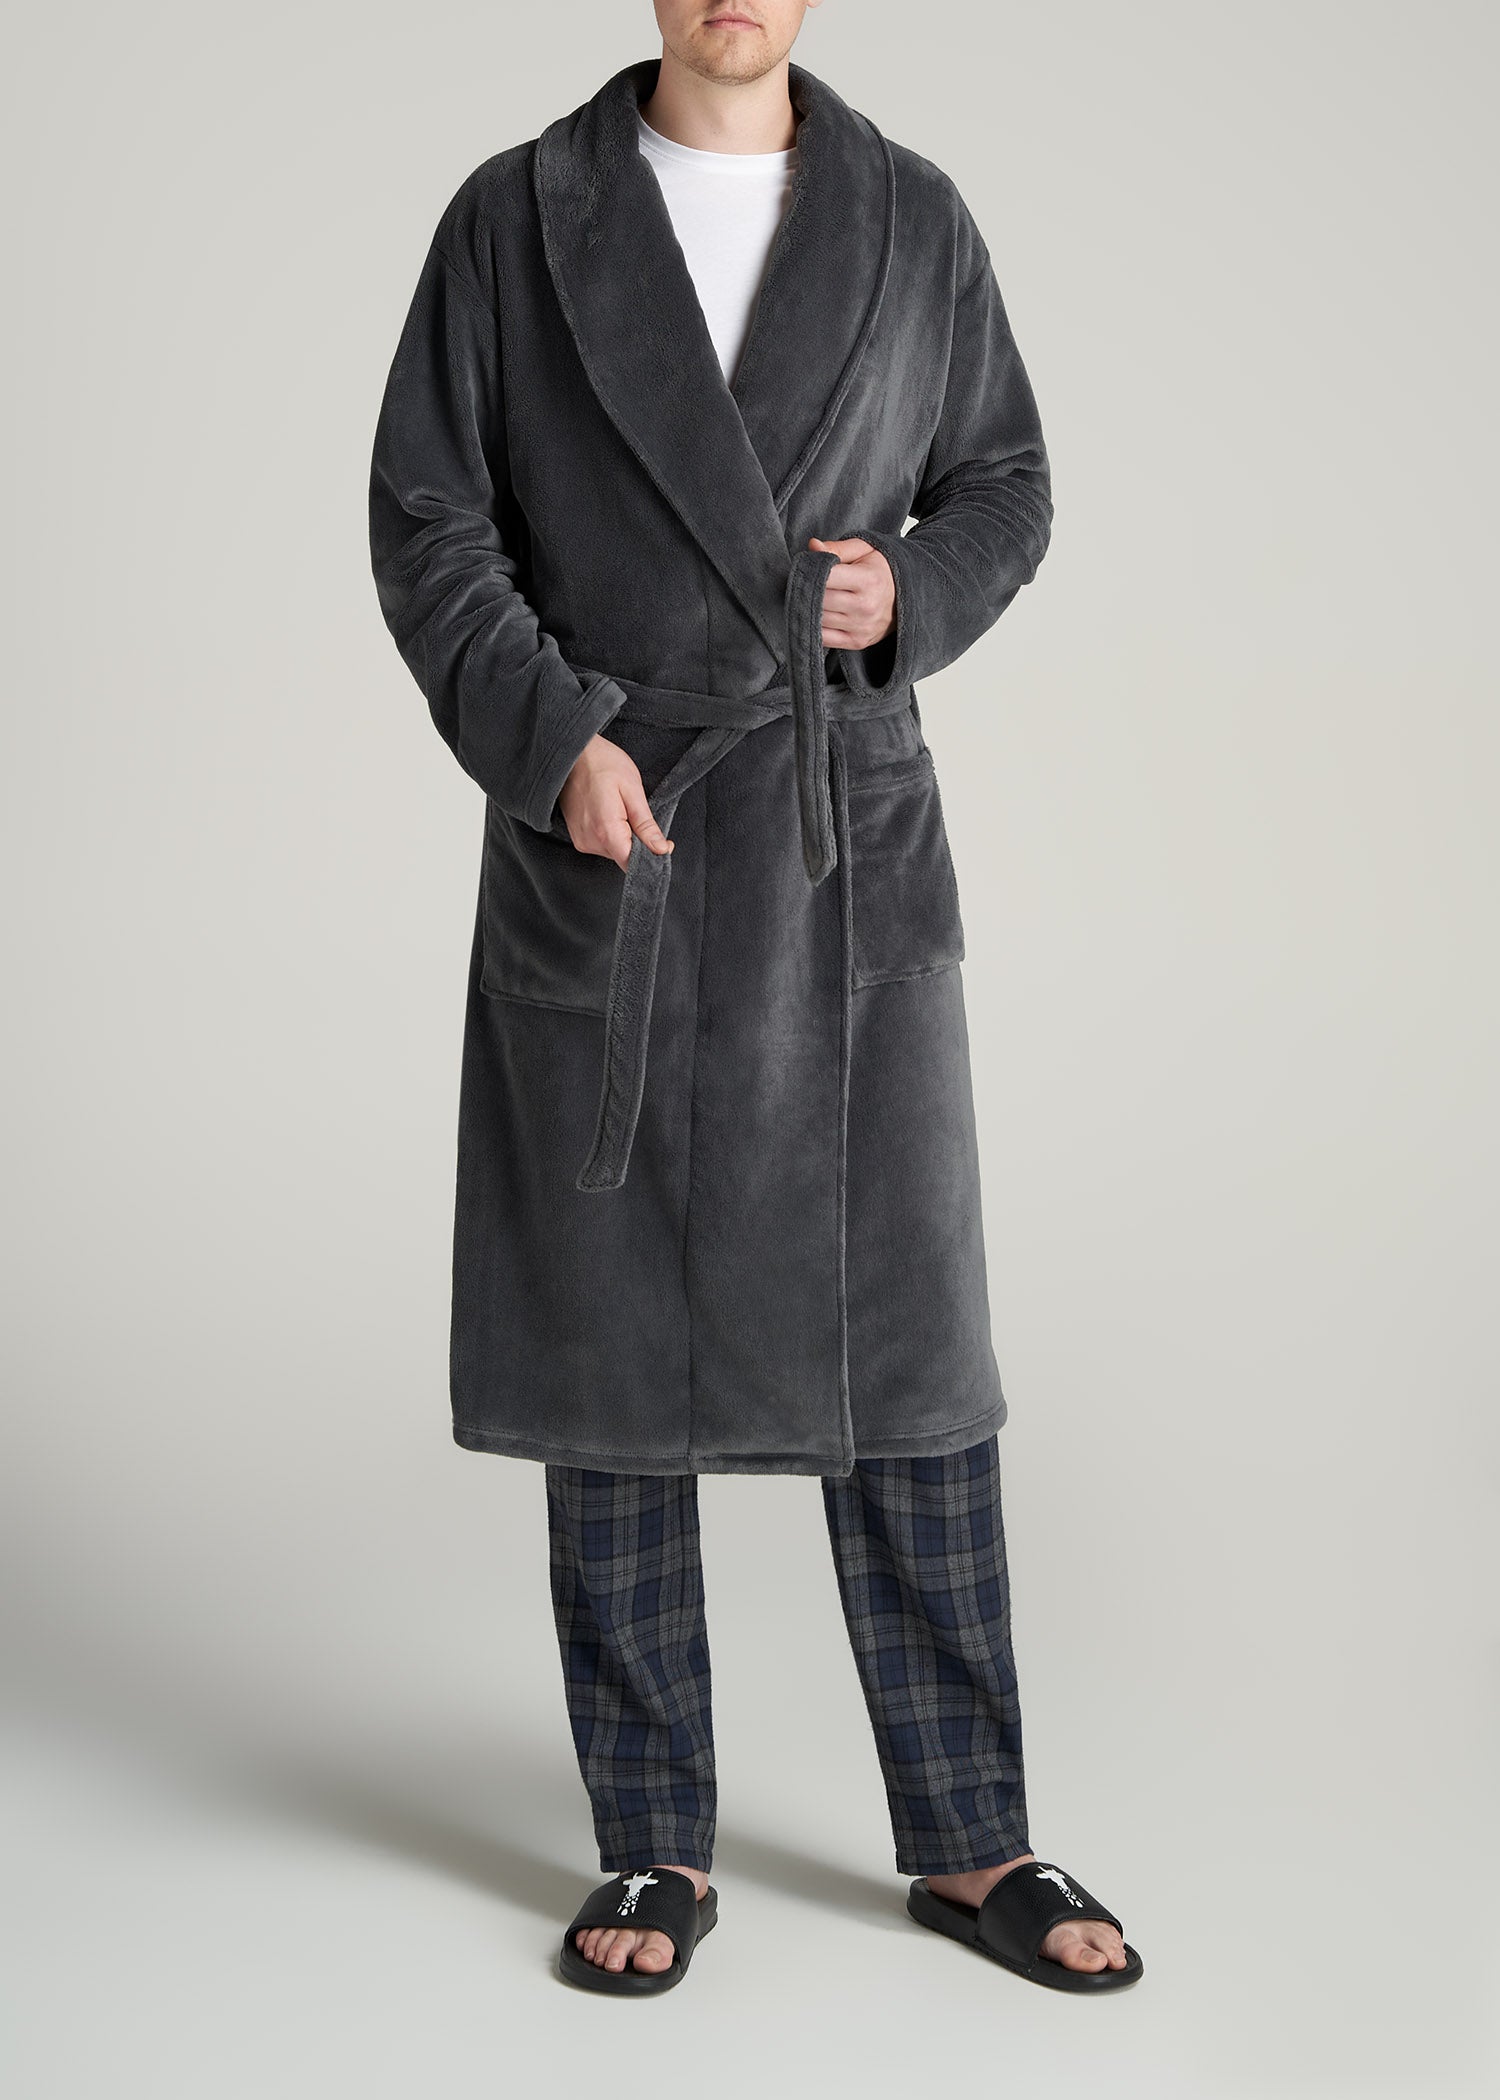    American-Tall-Men-Robe-Charcoal-front